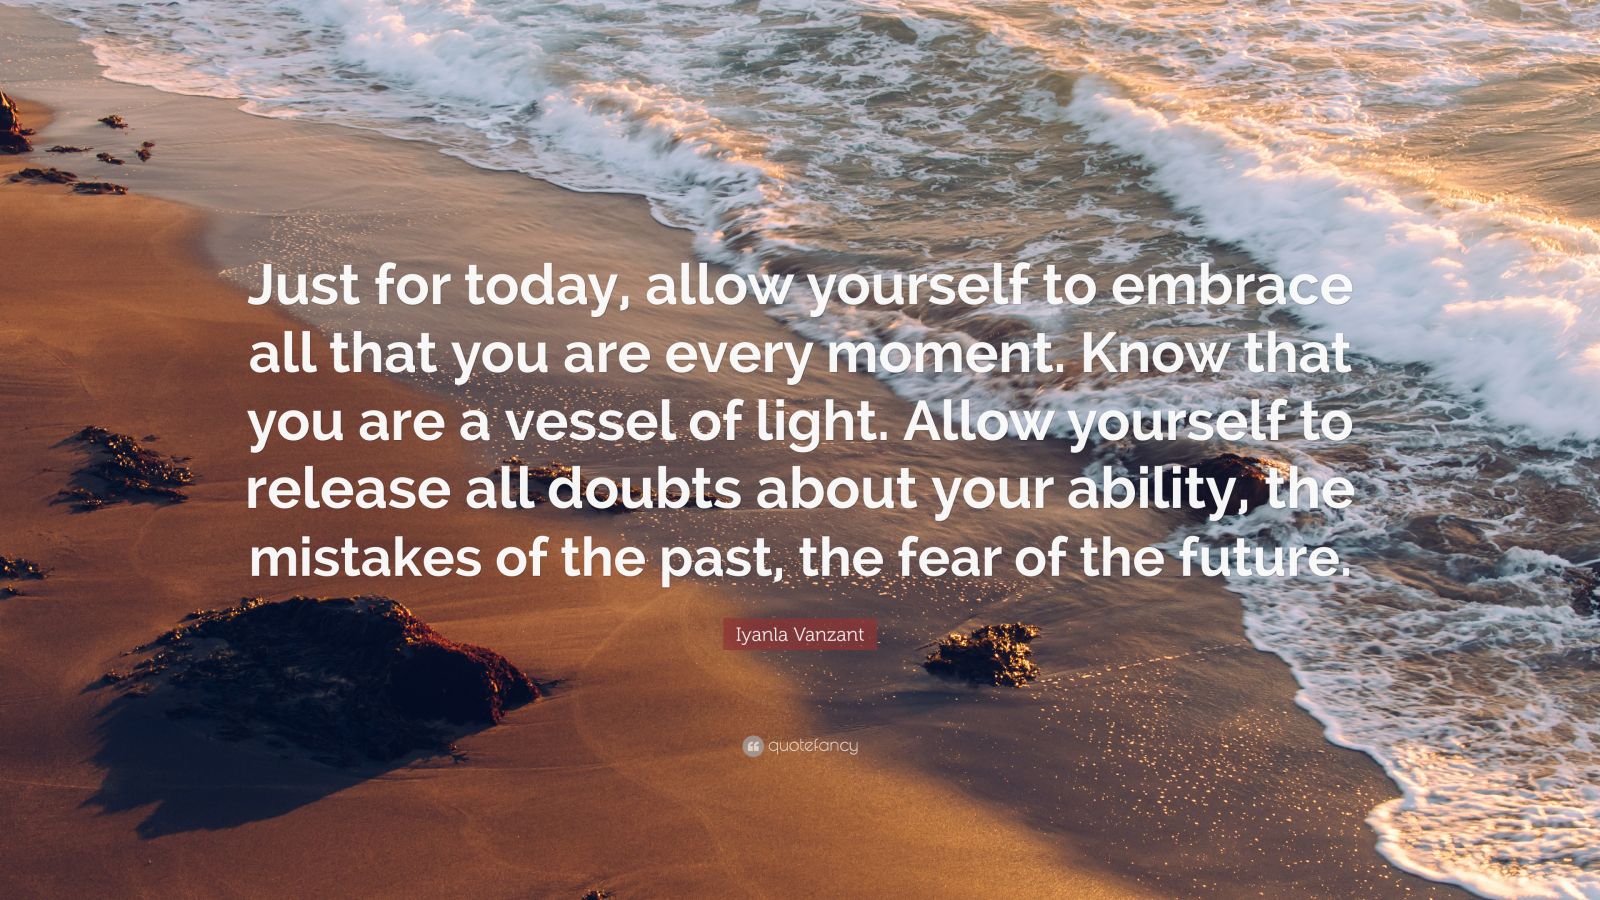 Iyanla Vanzant Quote: “Just for today, allow yourself to embrace all ...